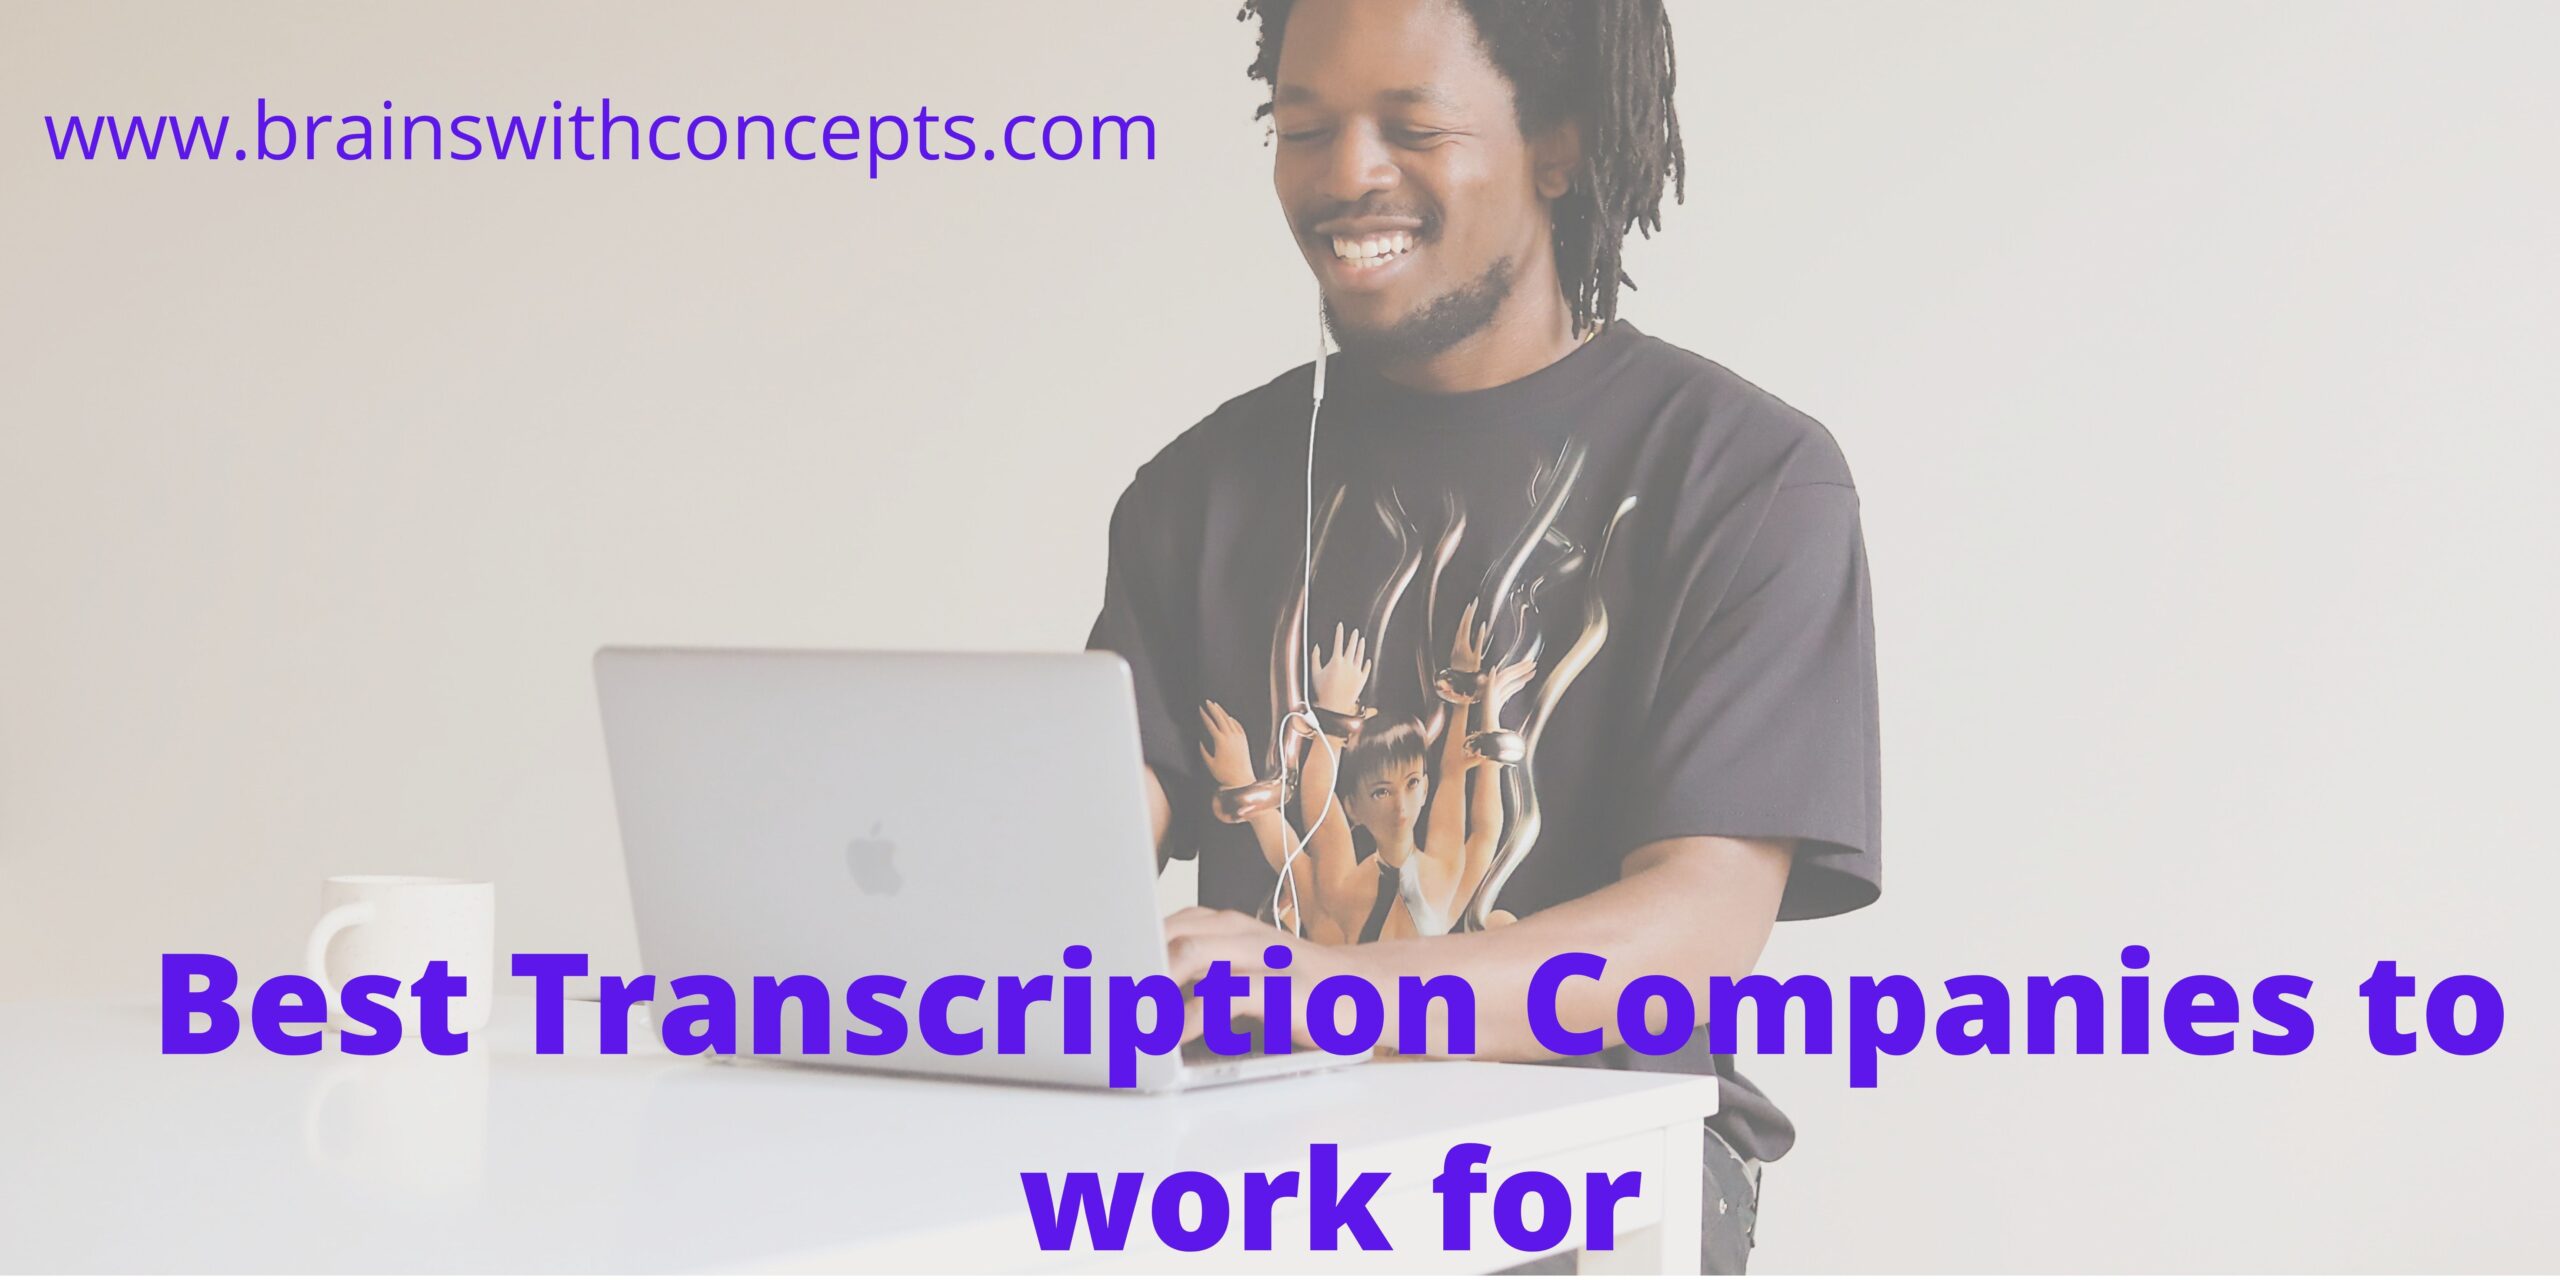 Best Transcription Companies to work for